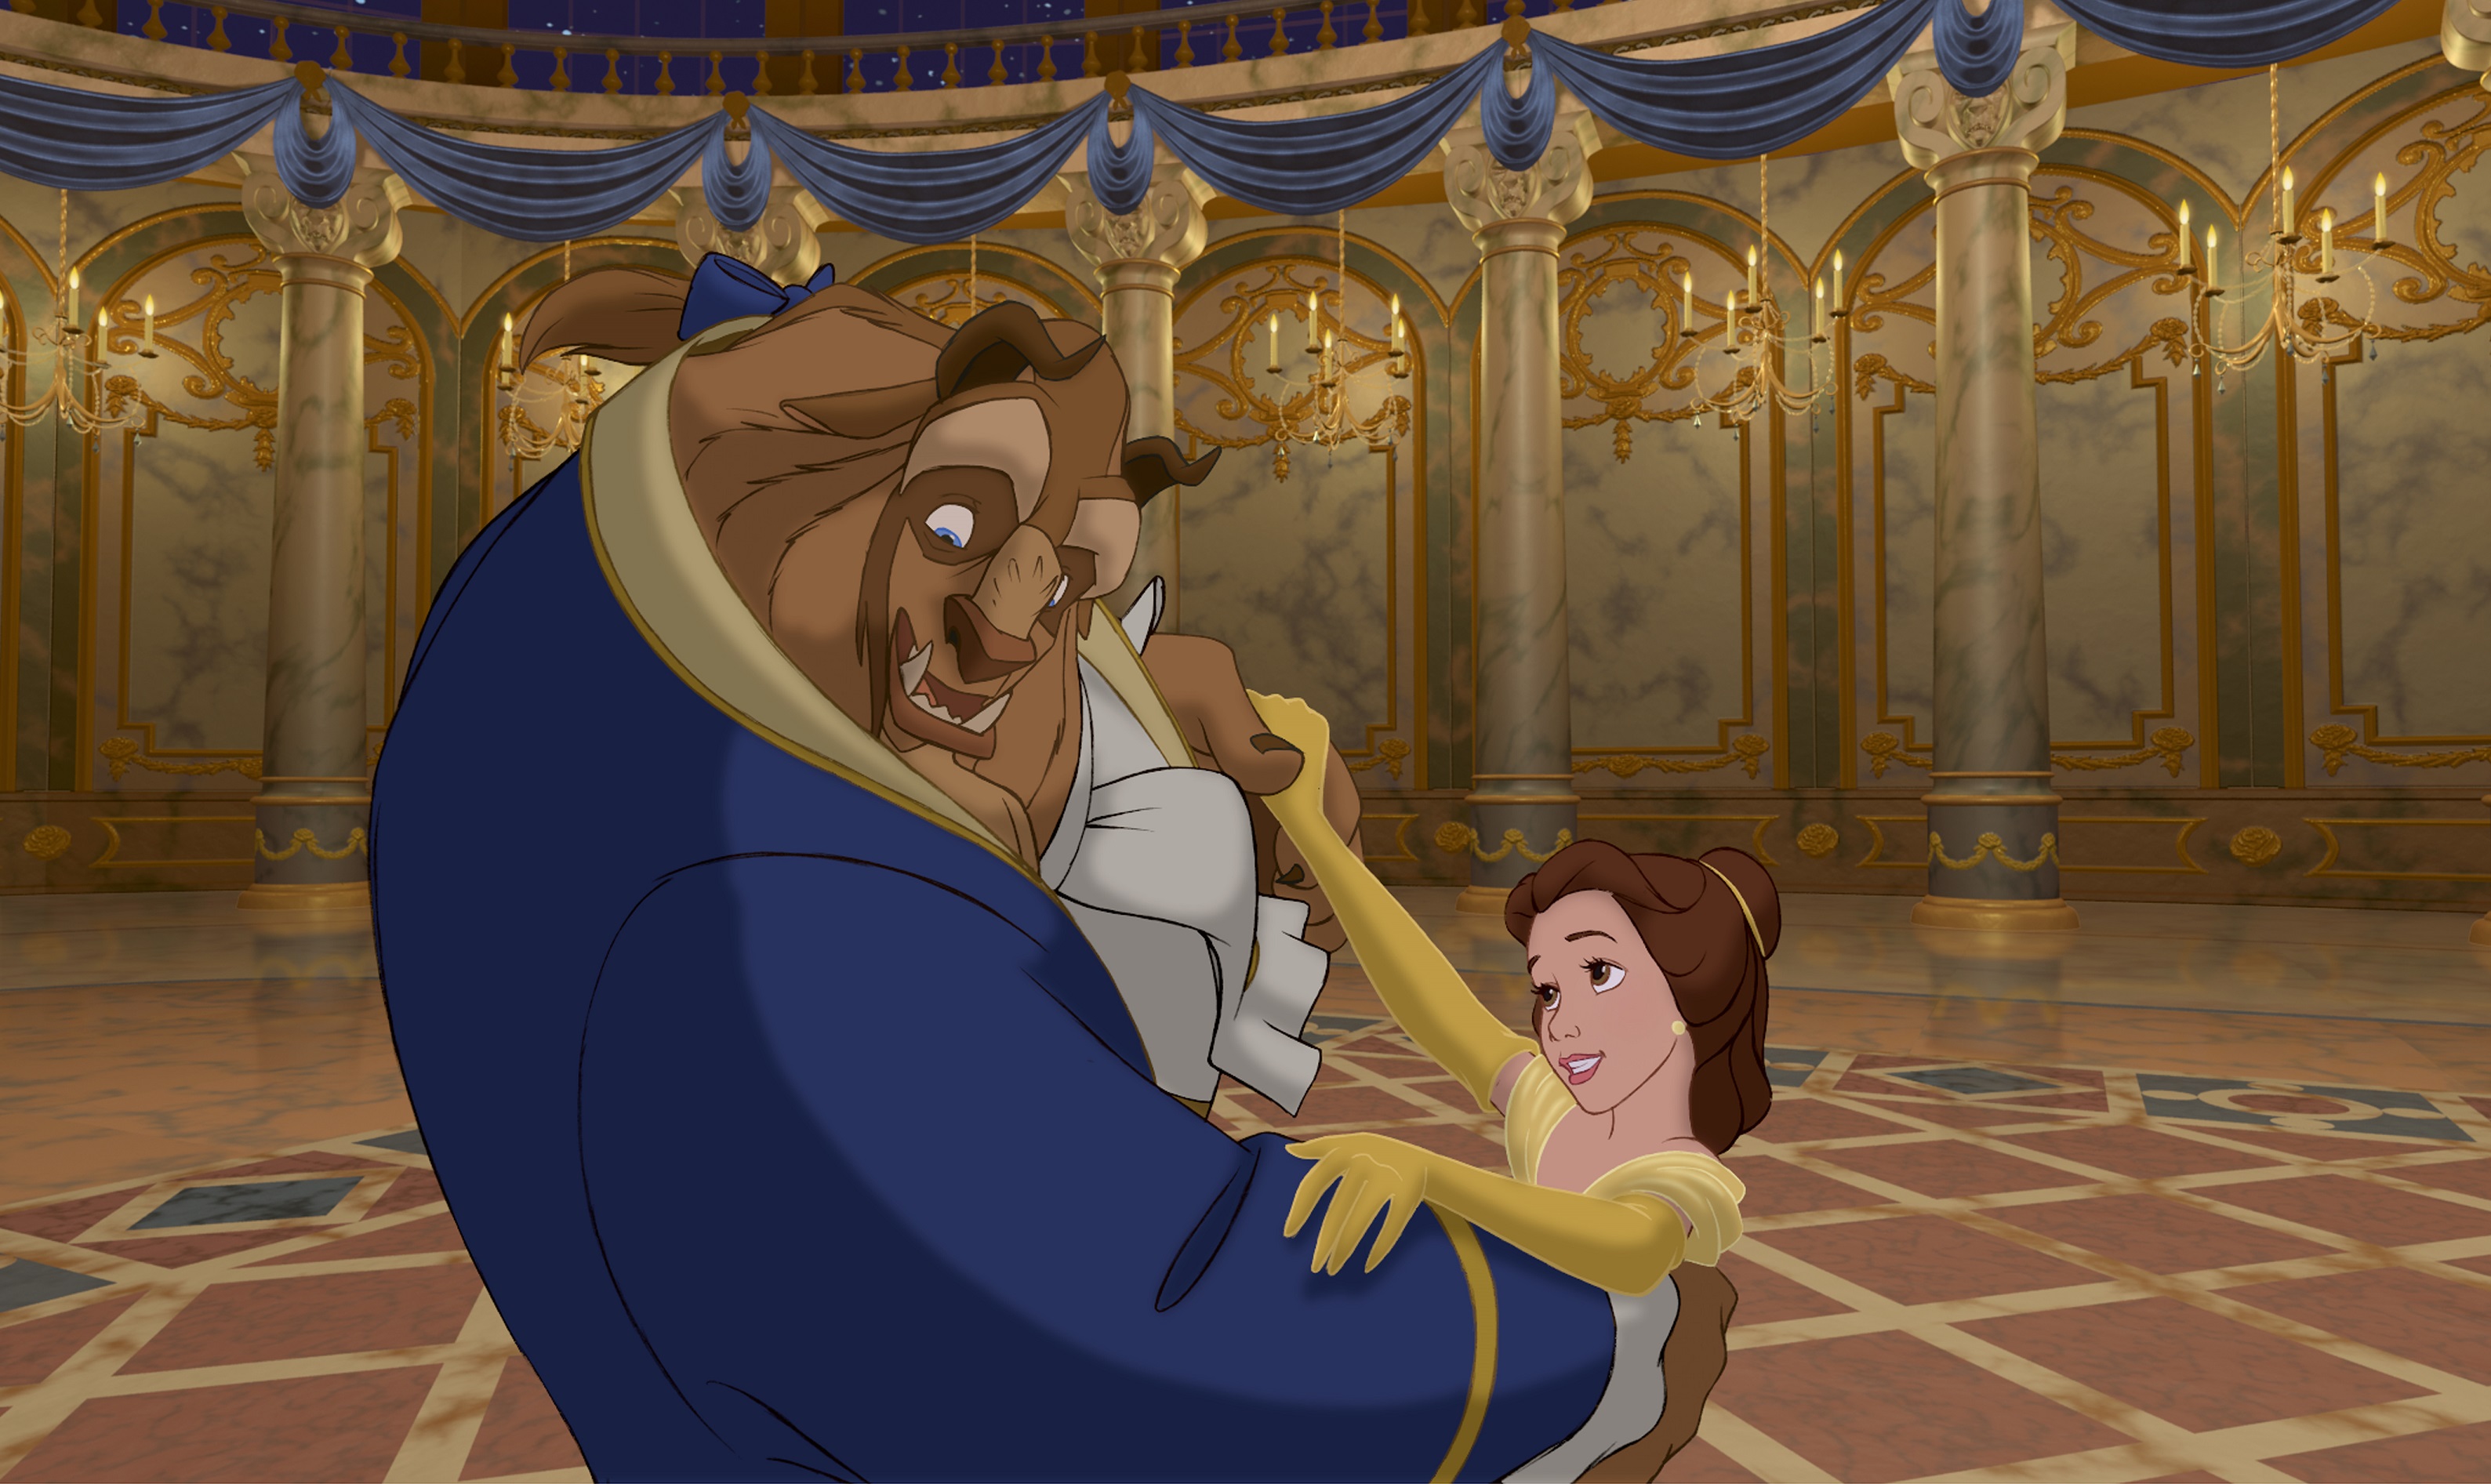 Beauty and the beast. Красавица и чудовище - Beauty and the Beast (1991). Красавица и чудовище 1991 Белль. Мультик красавица и чудовище 1991. Beauty and the Beast 1991 принц.